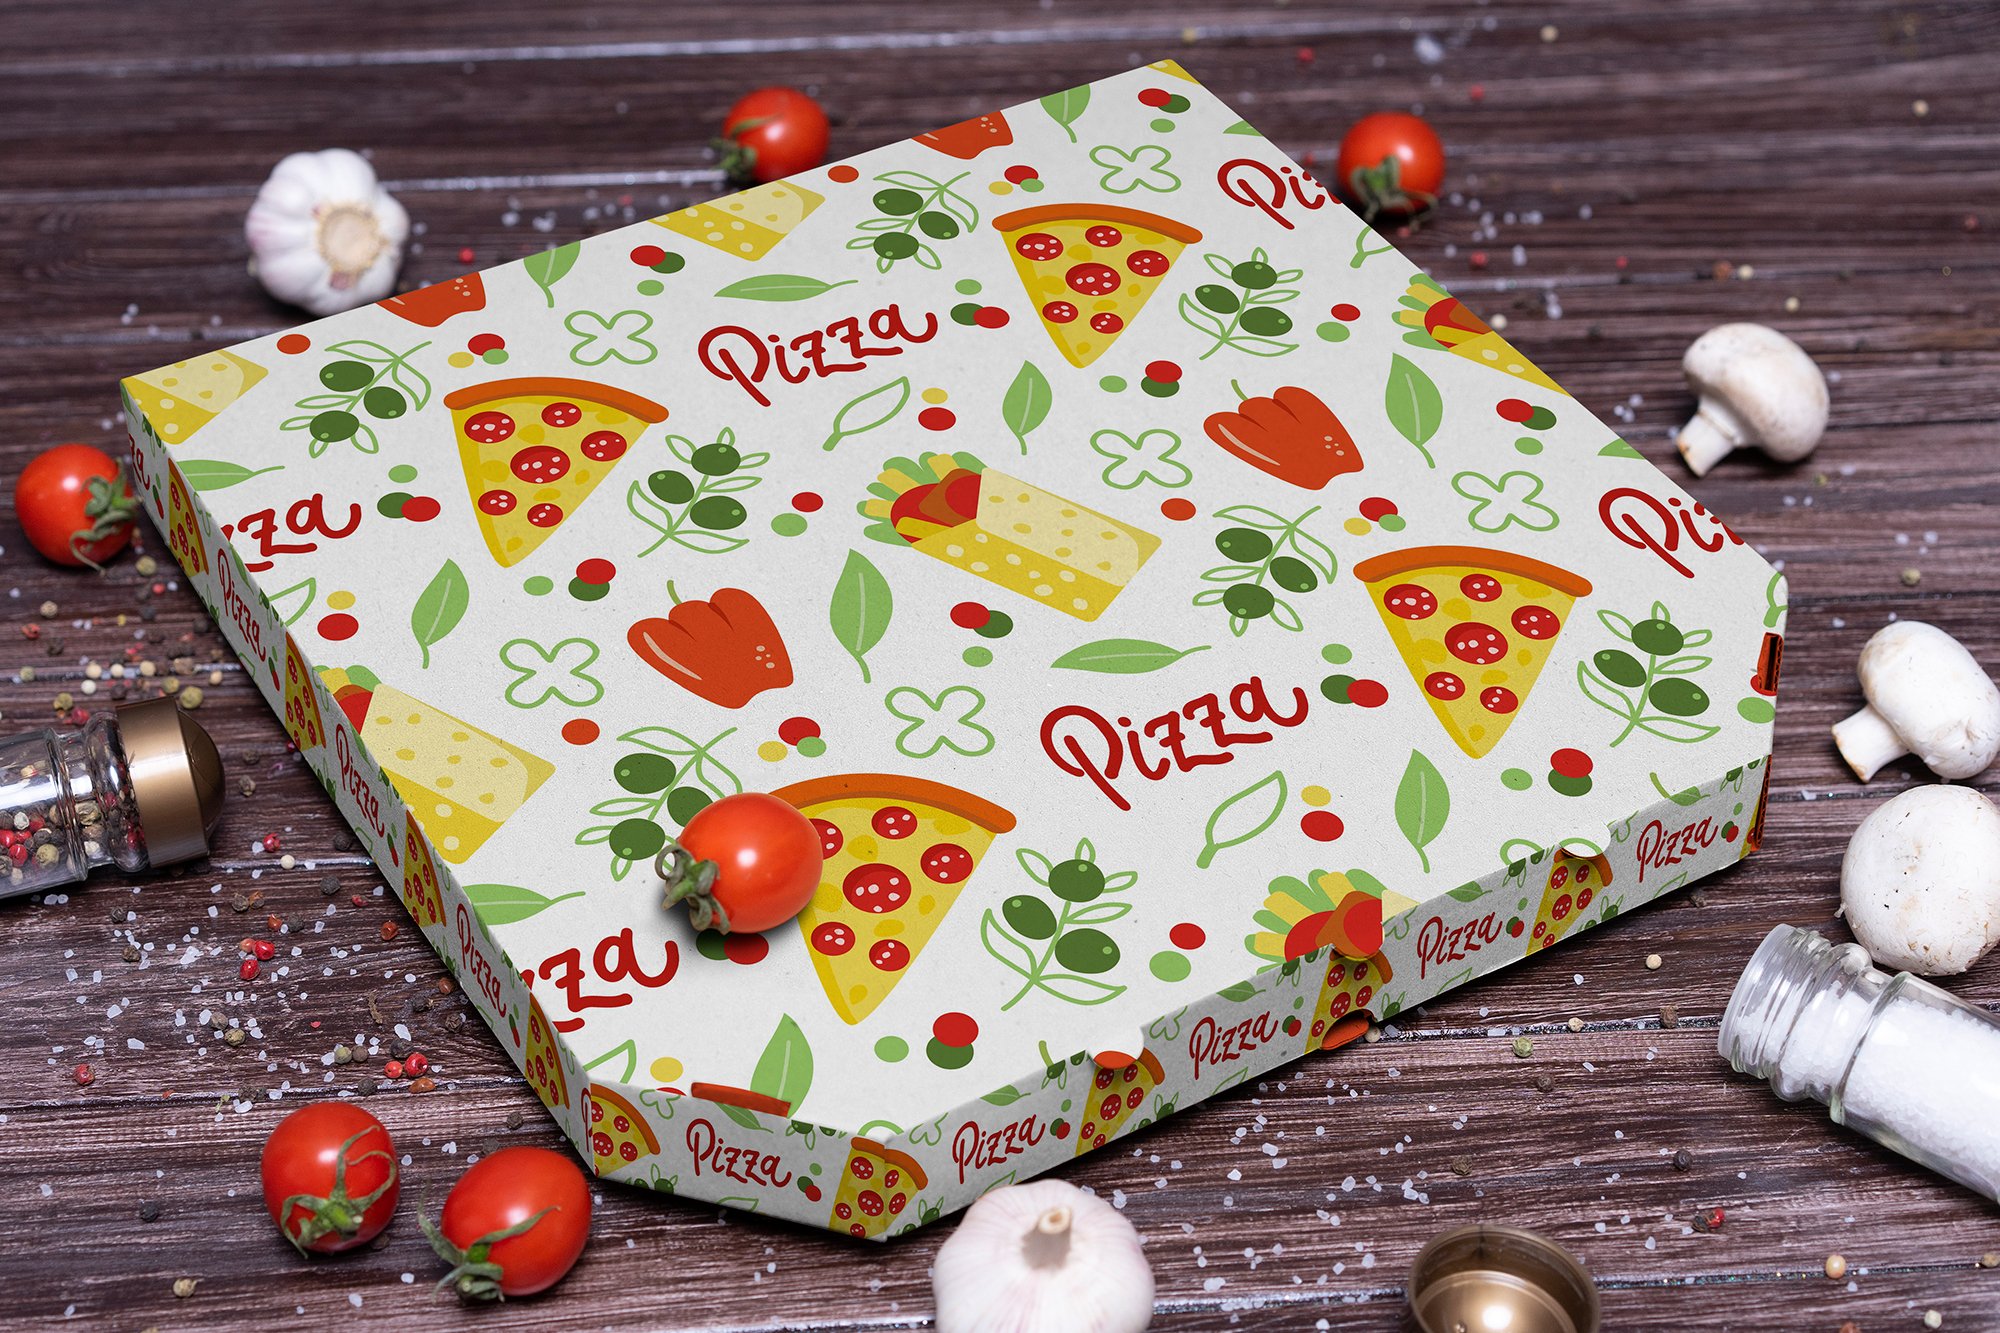 Print on pizza packaging.